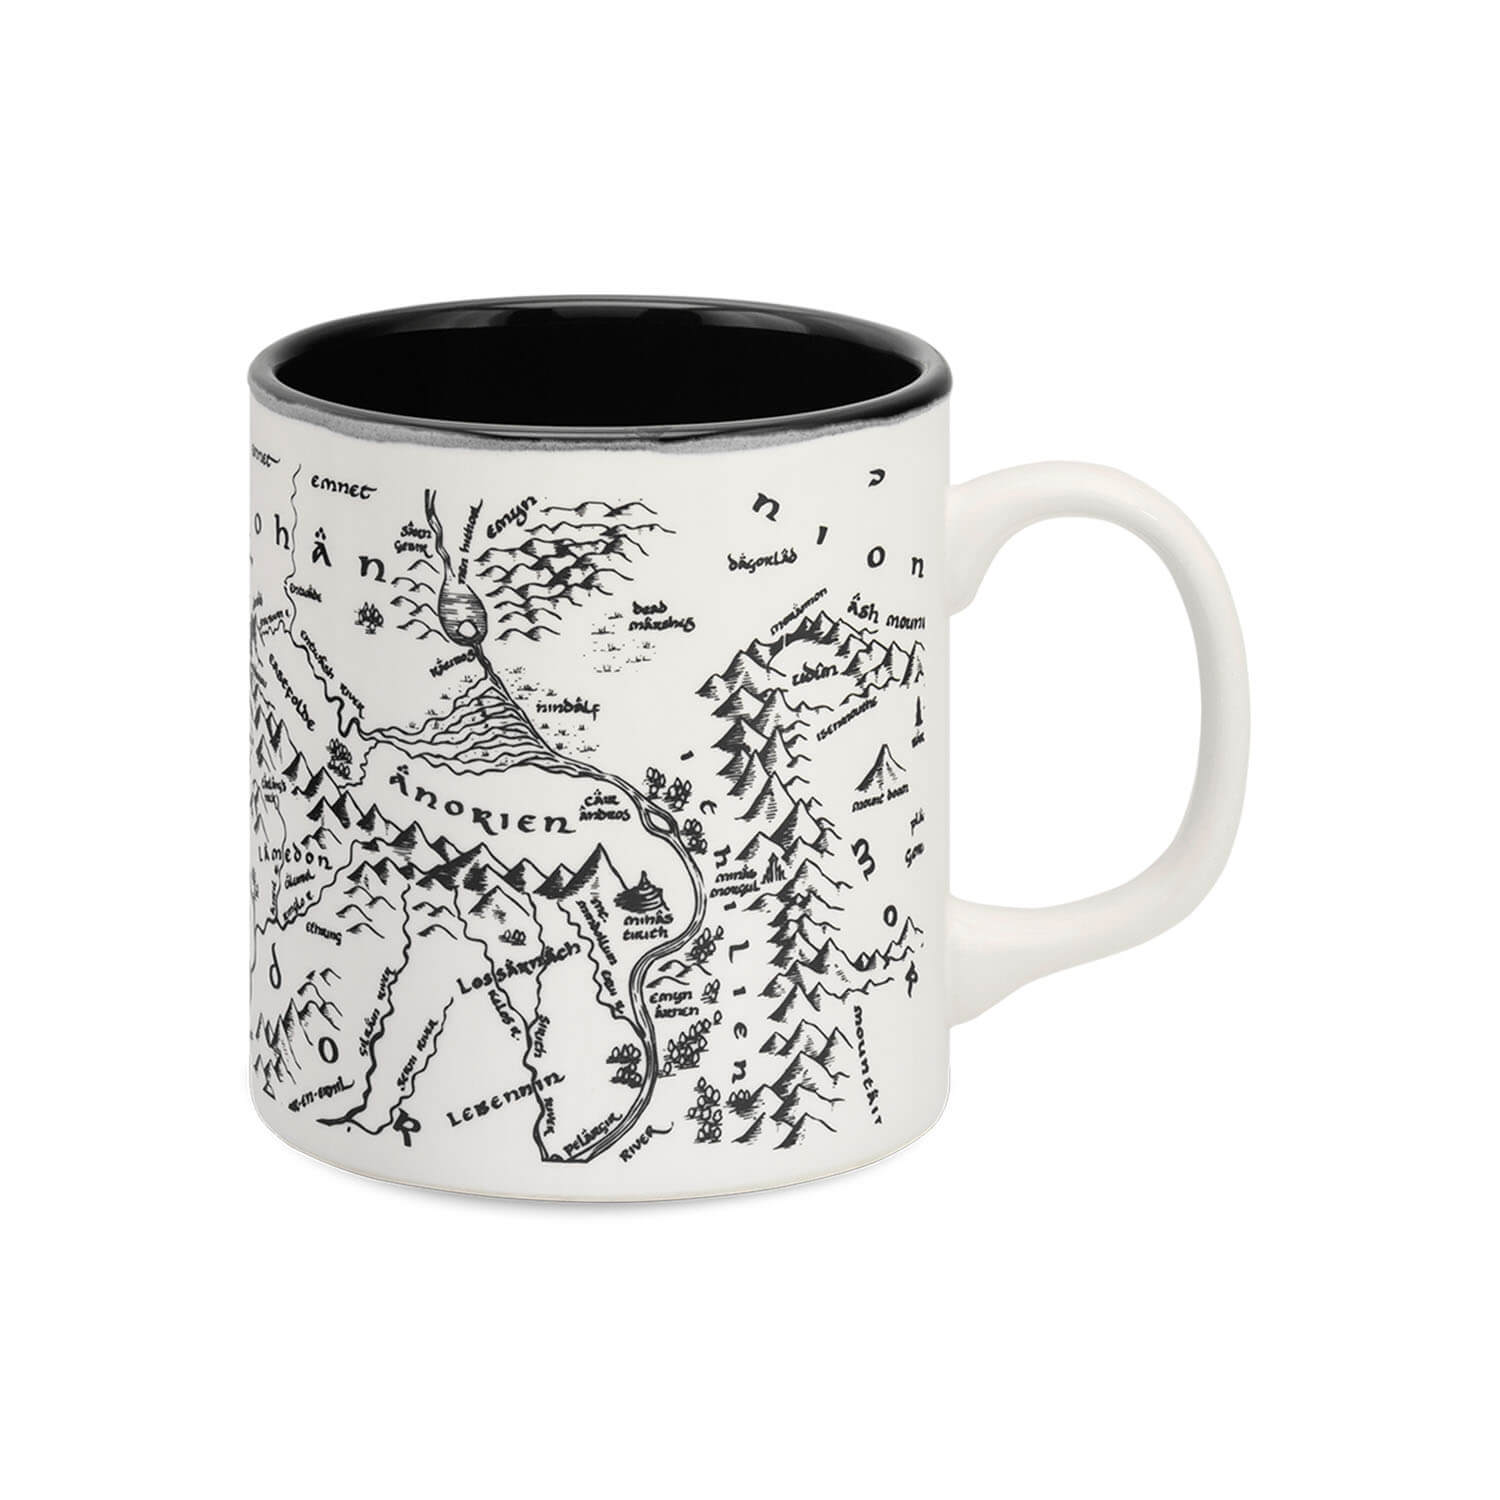 The Lord of the Rings Middle Earth Map Mug Kupa